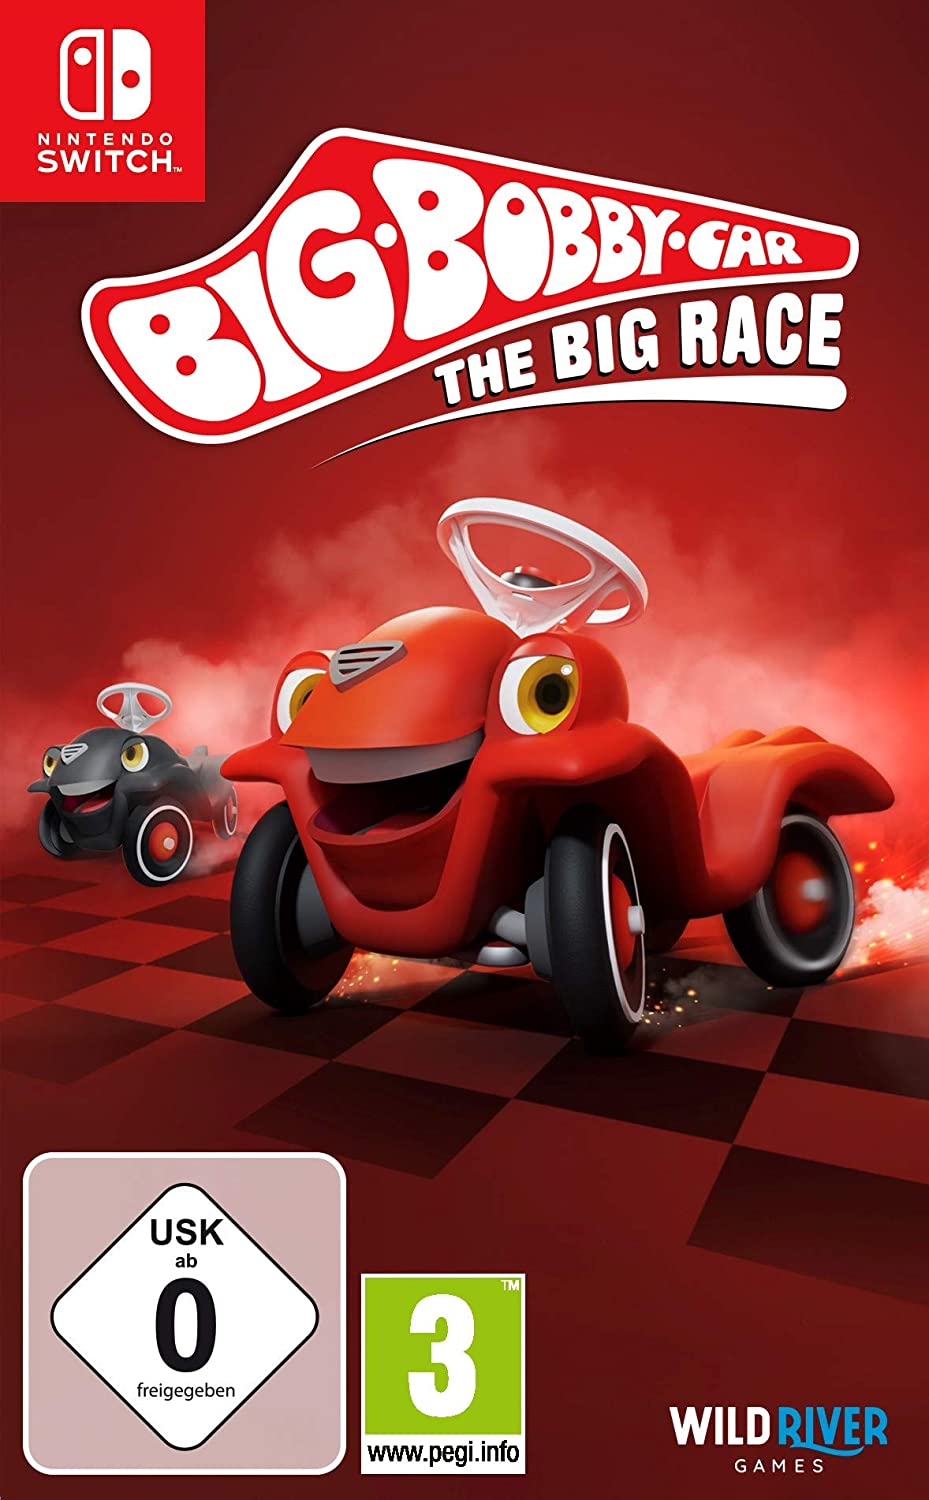 Big Bobby Car: the Big Race (Switch), Independent Arts Software GmbH